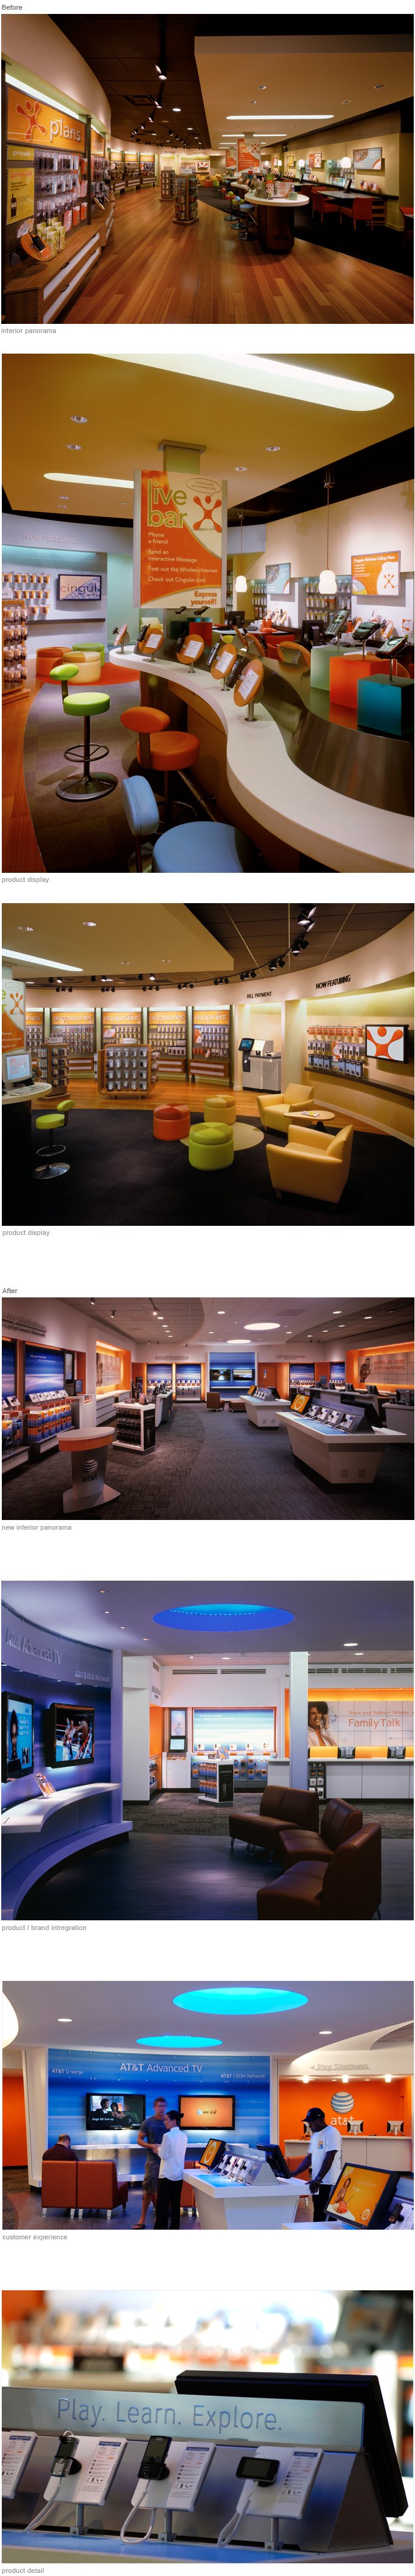 AT&T Experience Store